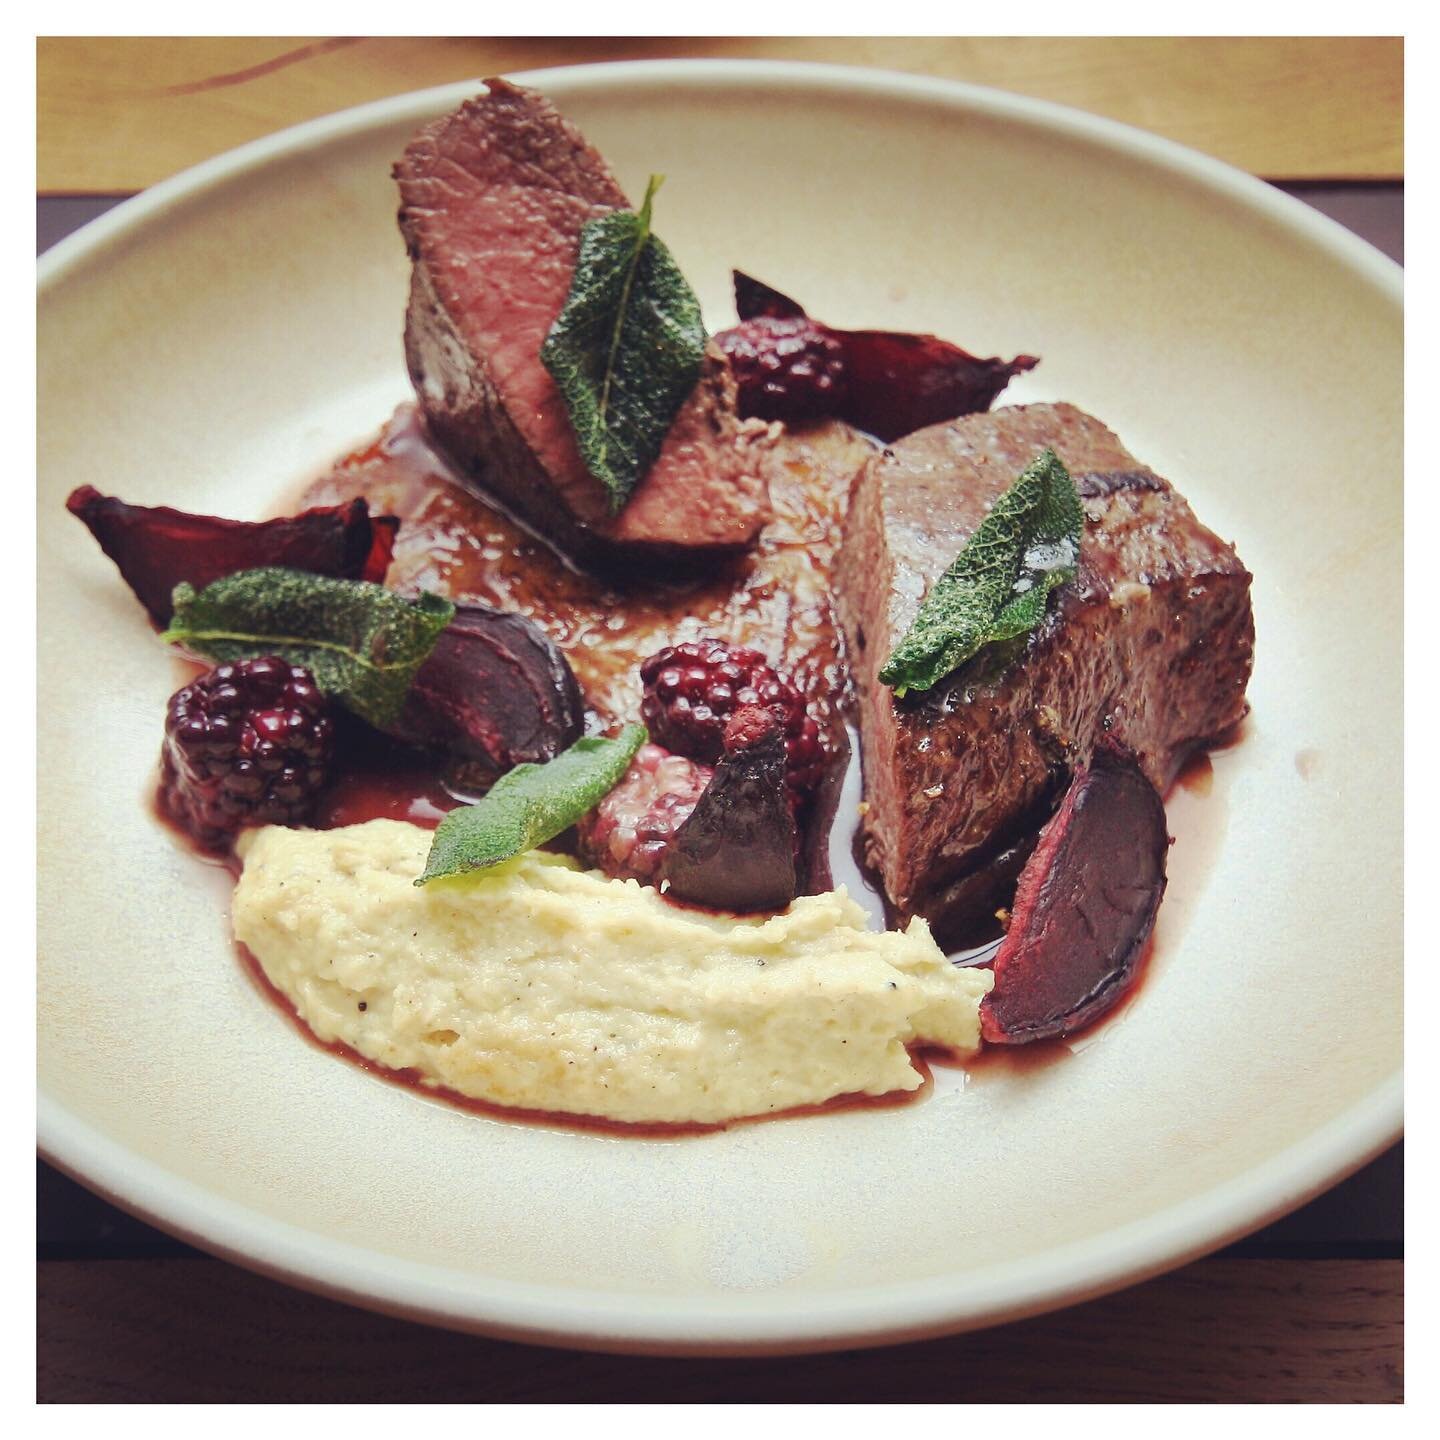 We&rsquo;re menu-planning for 2021, and hoping for better times with guests sat around our dining table enjoying this venison loin with celeriac puree, roasted beetroot and blackberry jus.
⁣
Our delivery service continues - even the snow hasn&rsquo;t